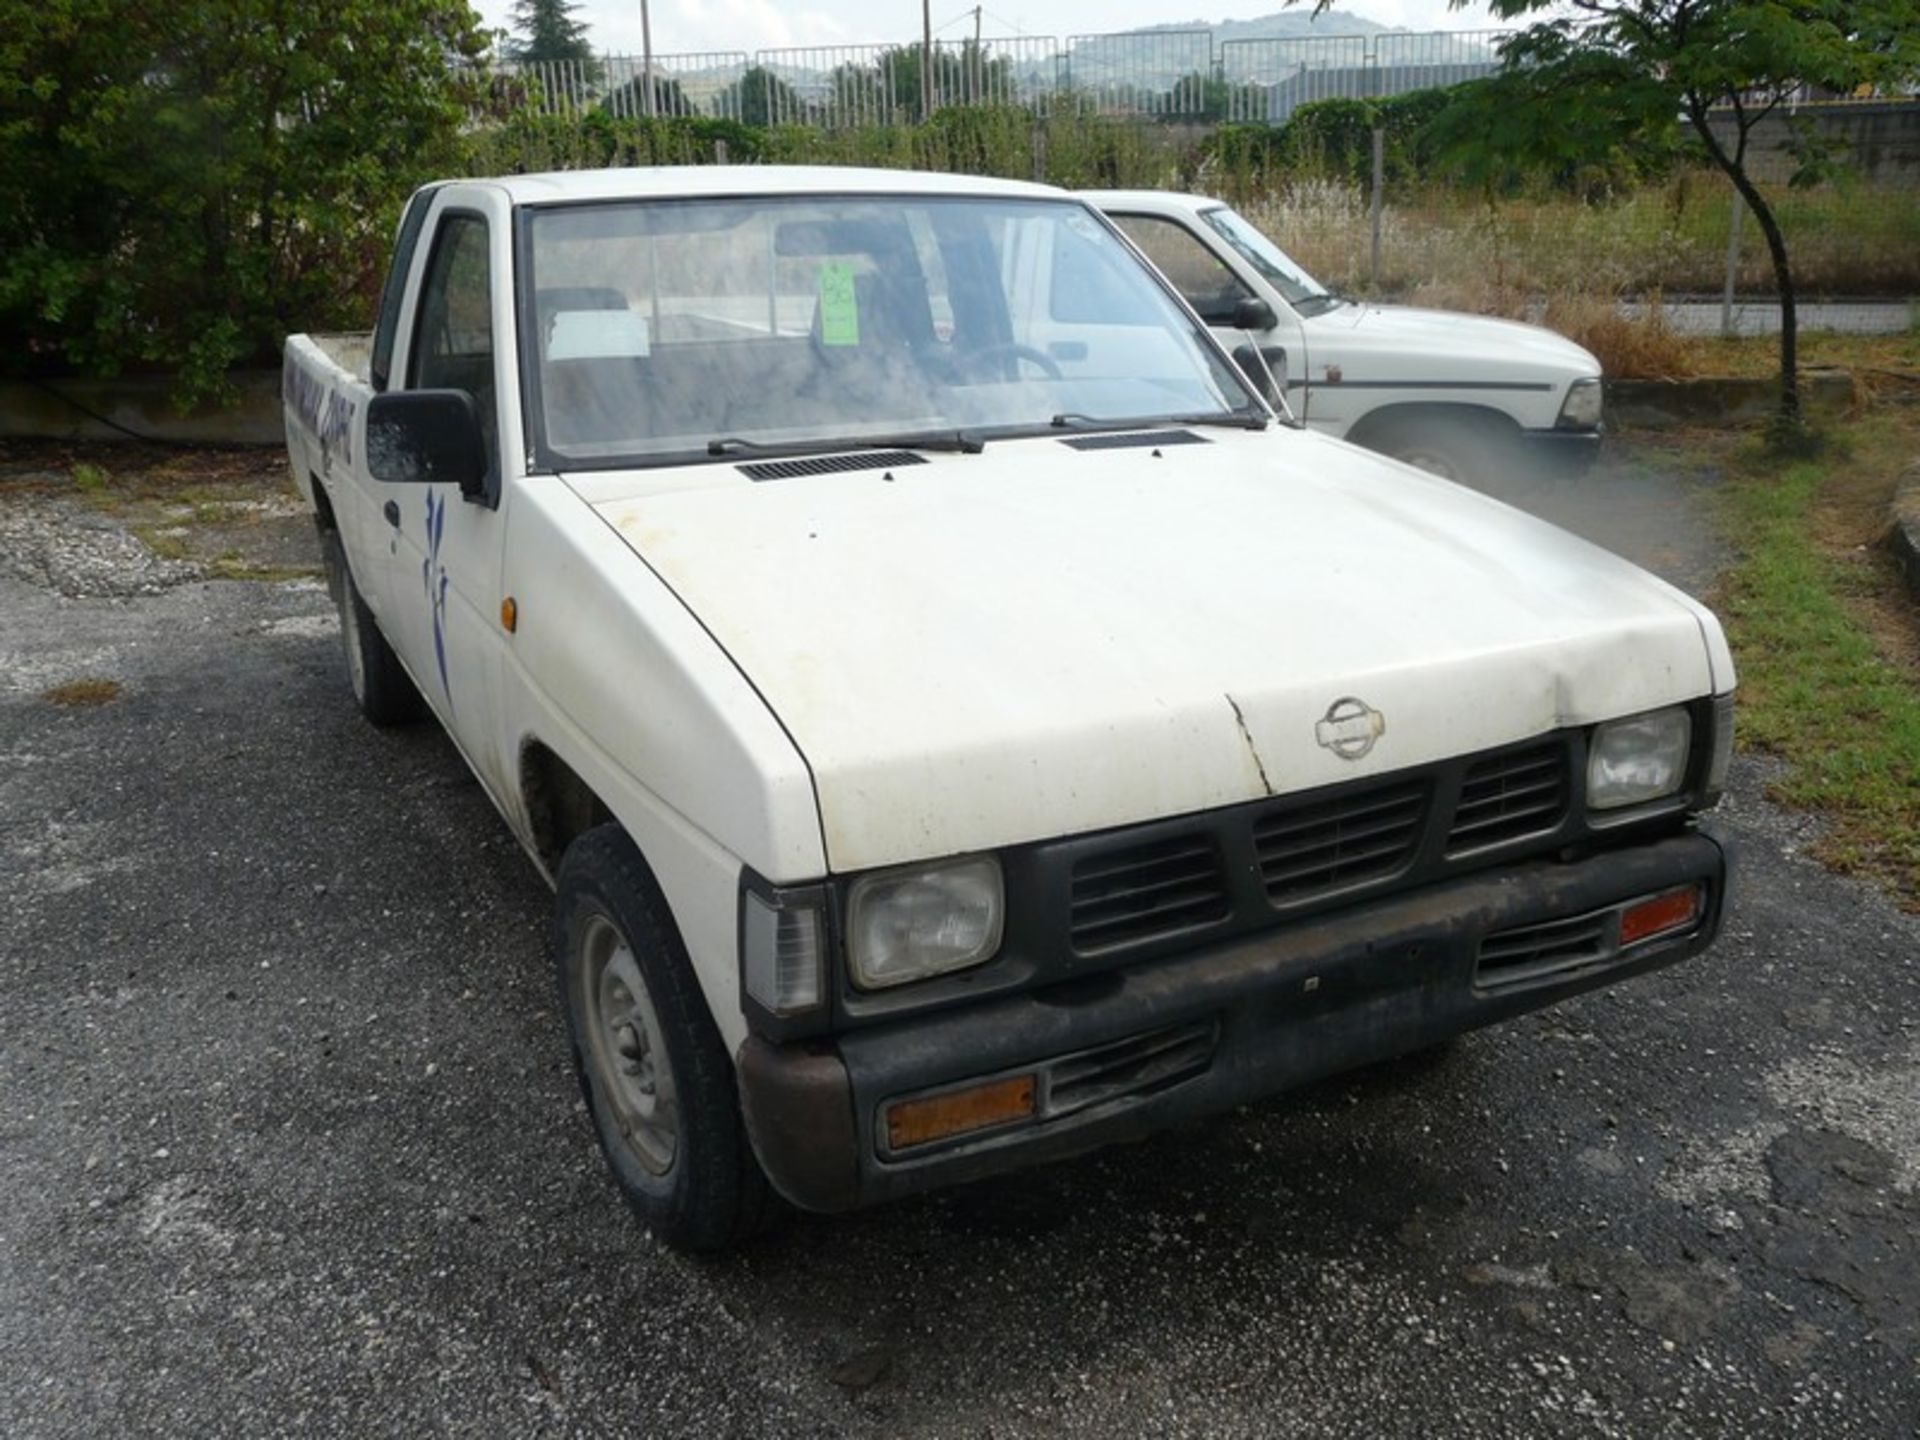 NISSAN KING CAB , REG: NBK 3437,PICK UP, PETROL ,KM 354381, WORKING CONDITION , MISSING BATTERY ( - Image 3 of 11